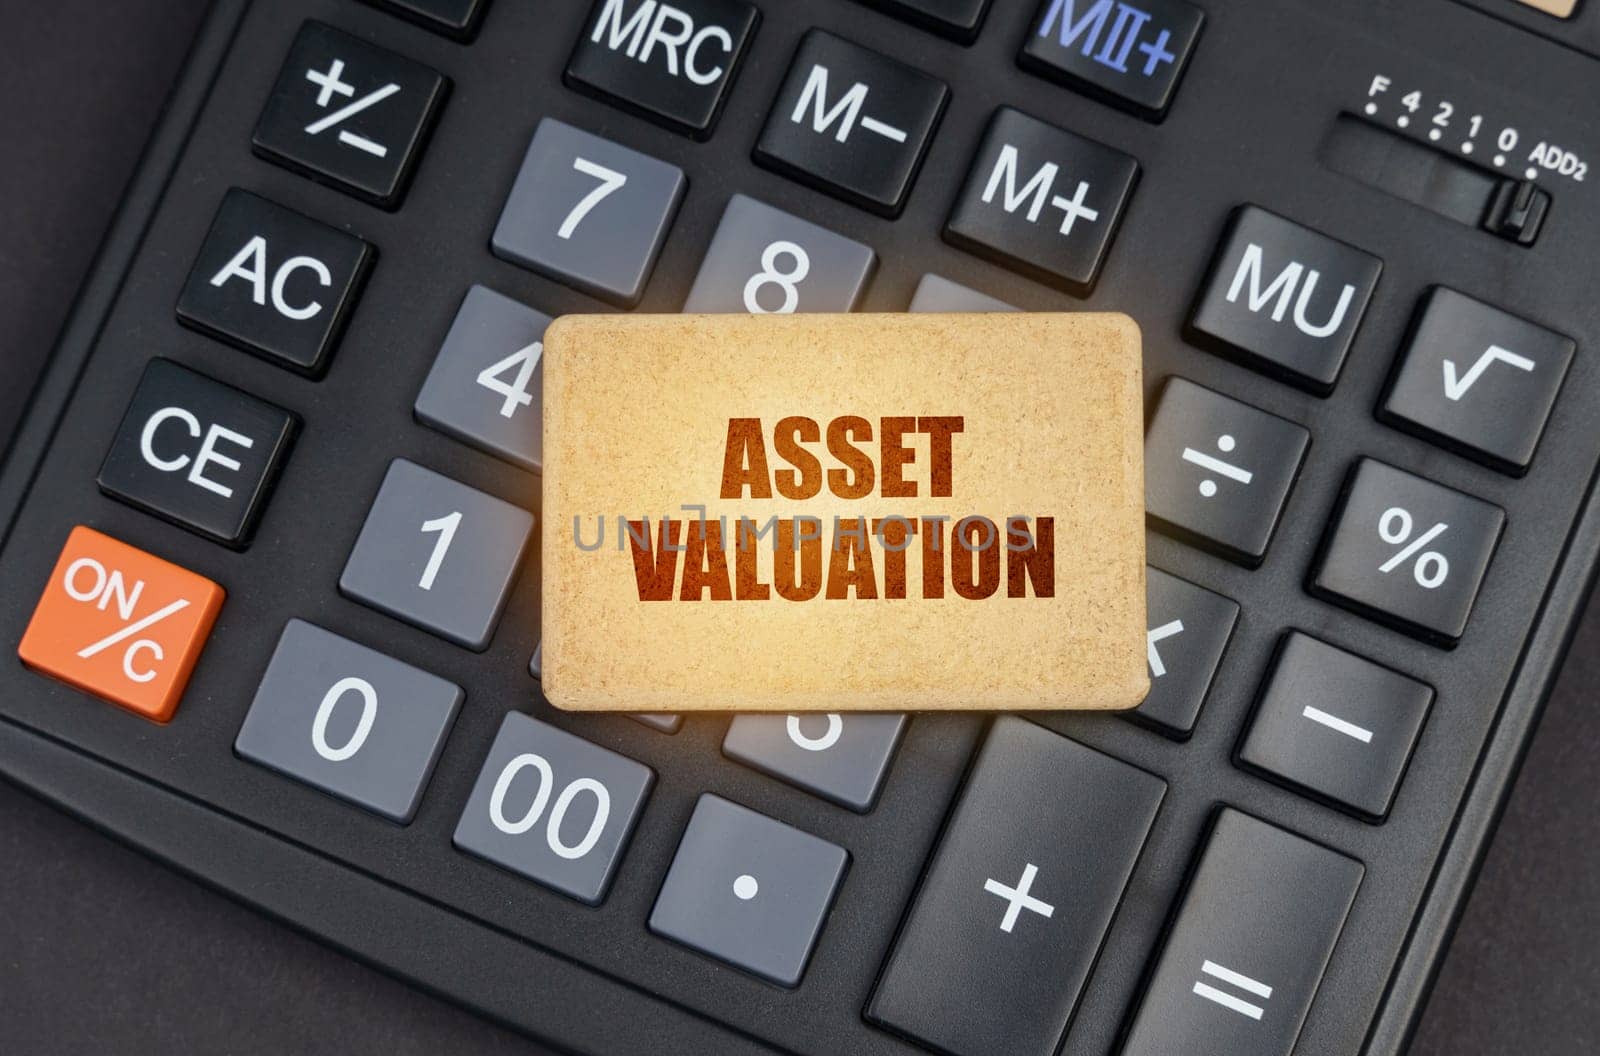 There is a sign on the calculator that says - Asset valuation by Sd28DimoN_1976